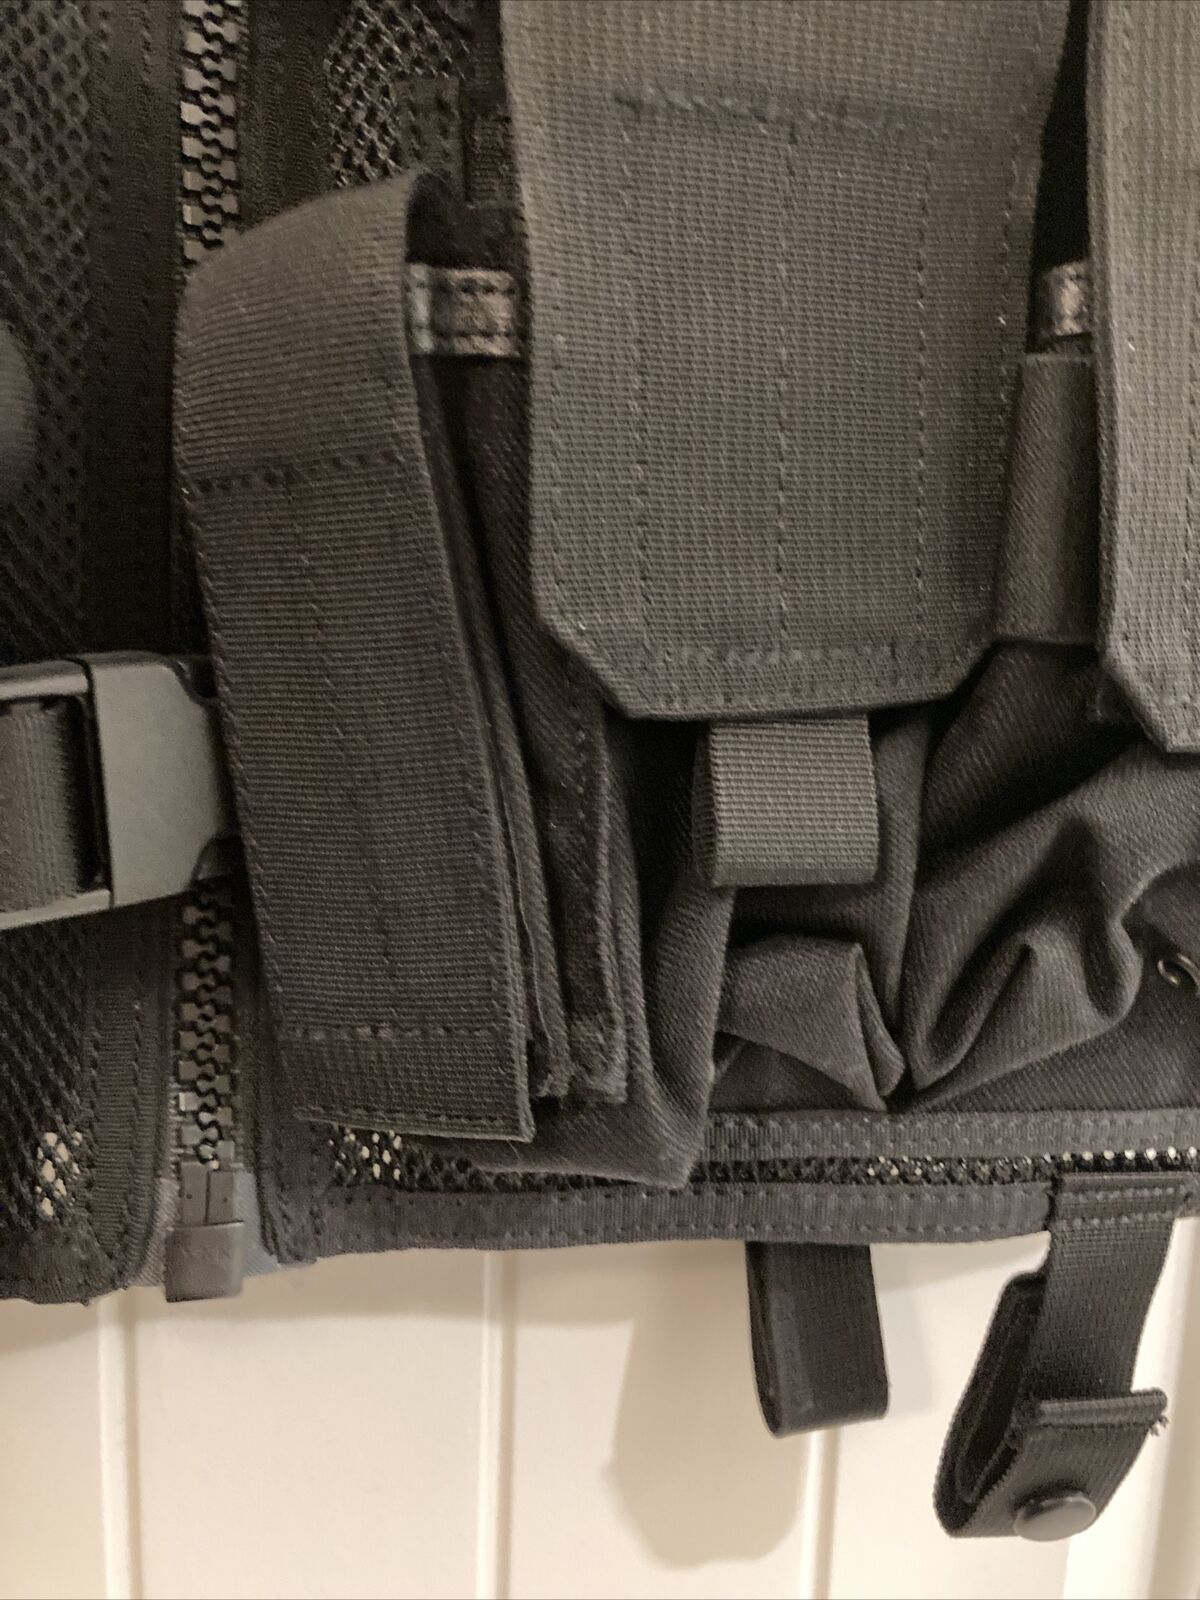 An Elite Survival Systems MVP Payload Tactical Vest with a lot of compartments.